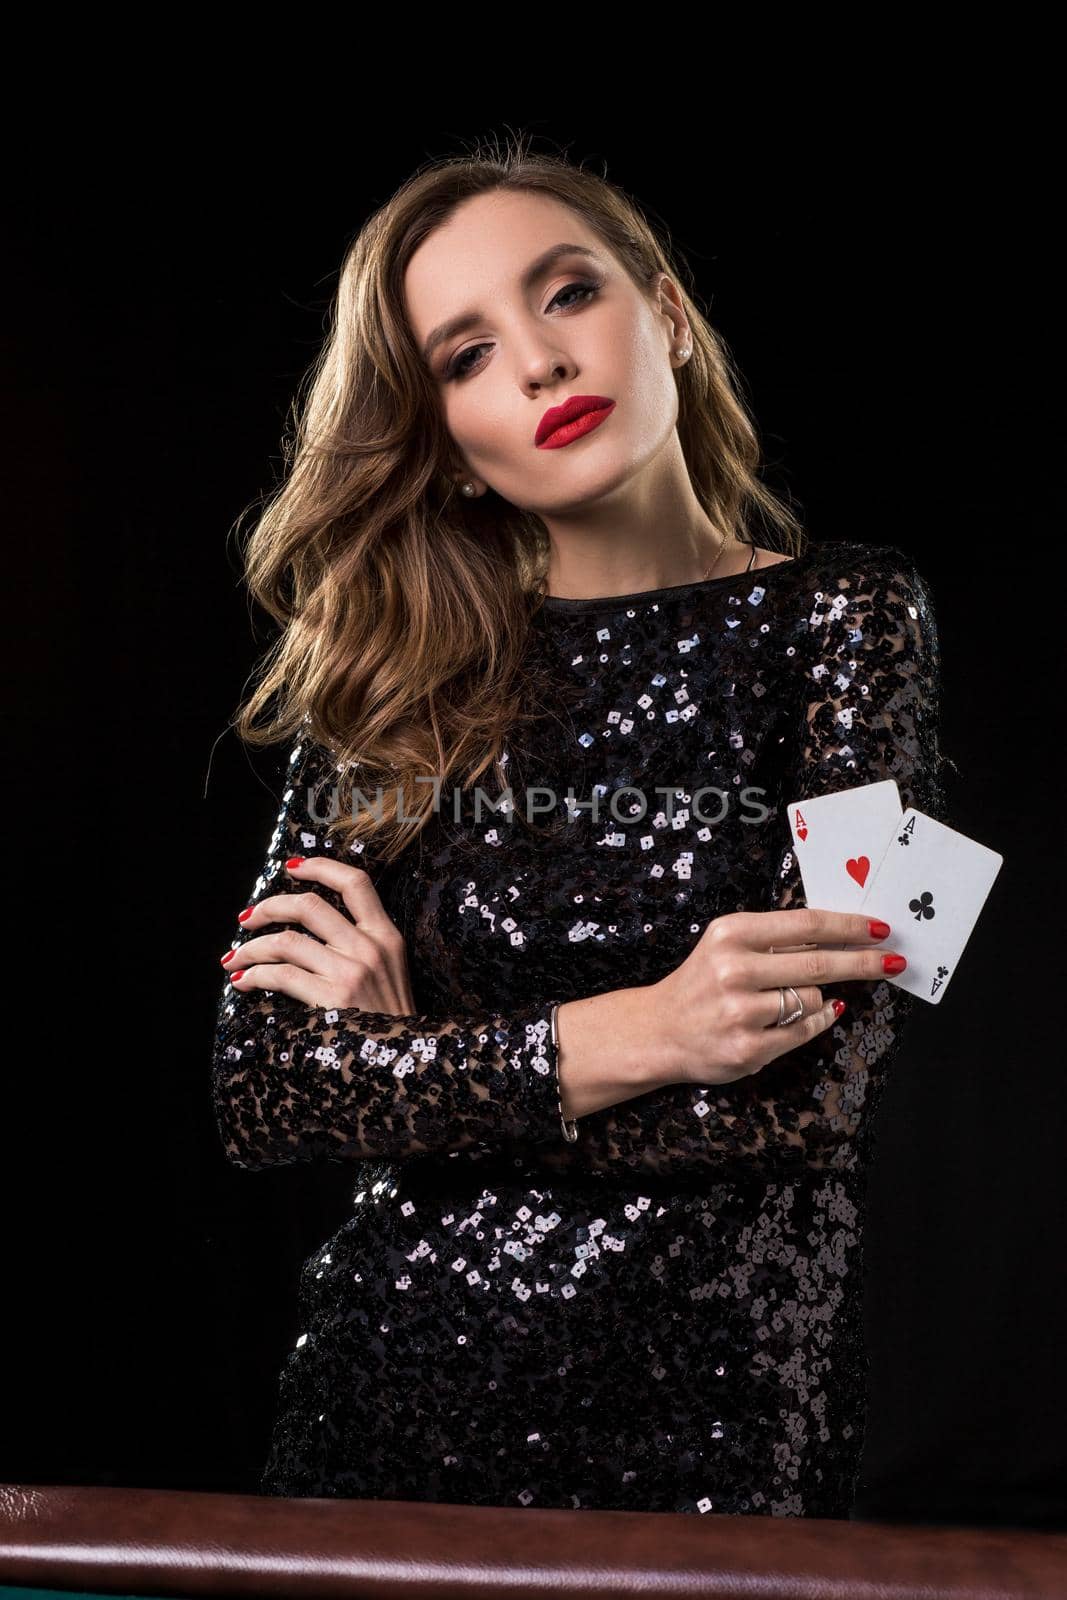 Young beautiful woman in black shiny dress holds poker cards in hands against a black background. The concept of gambling. Casino